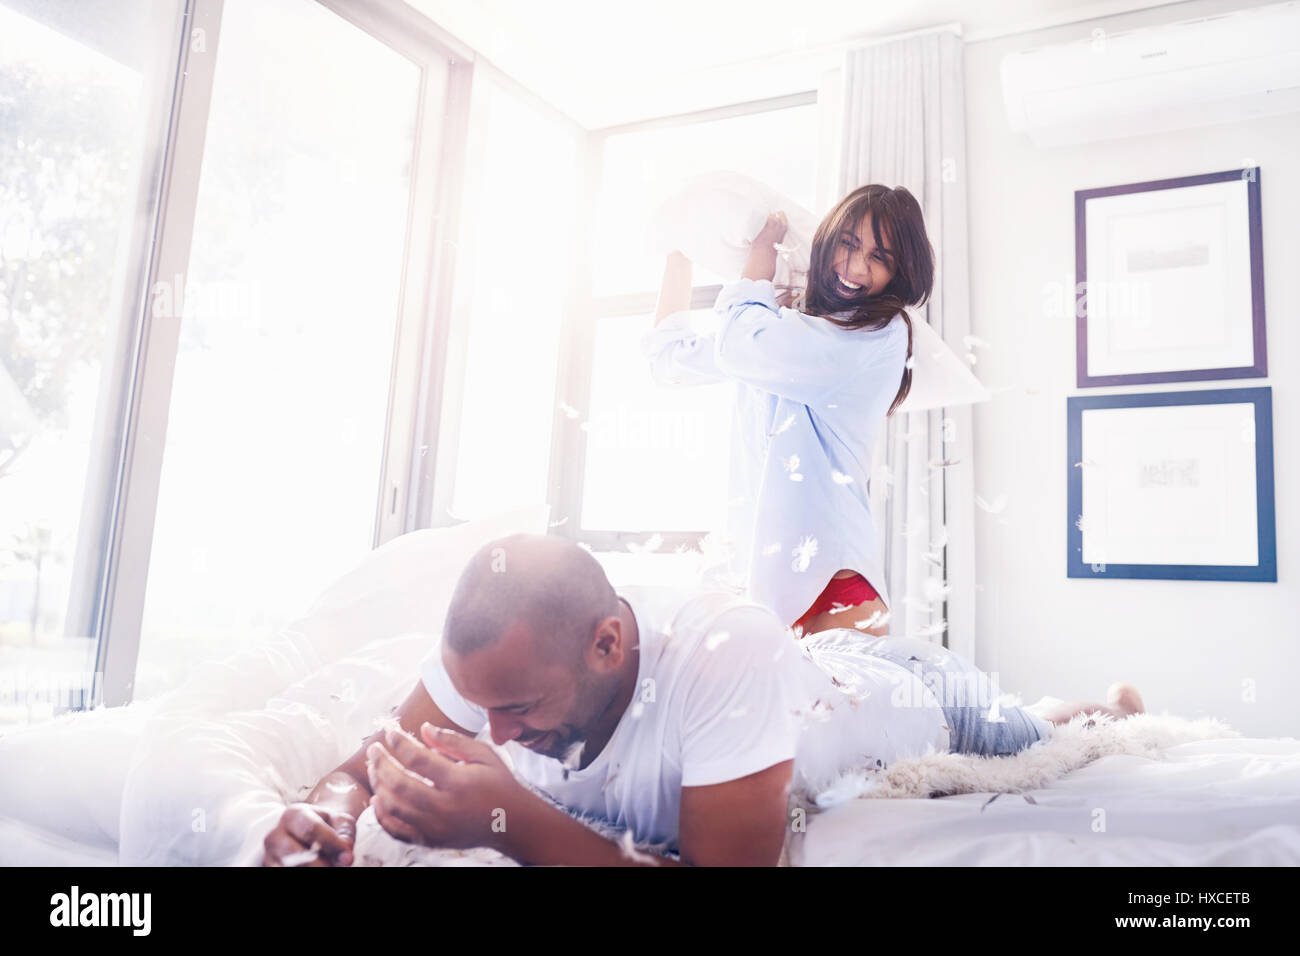 Playful couple pillow fighting in bedroom Stock Photo